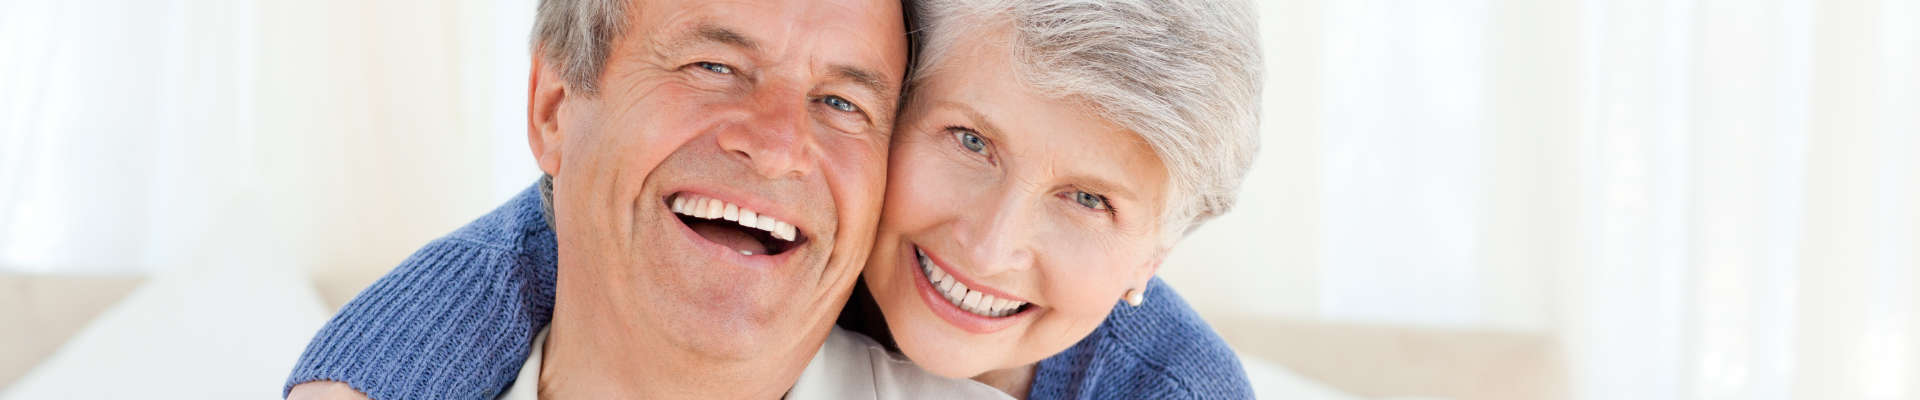 A pair of laughing, older people. They embrace.